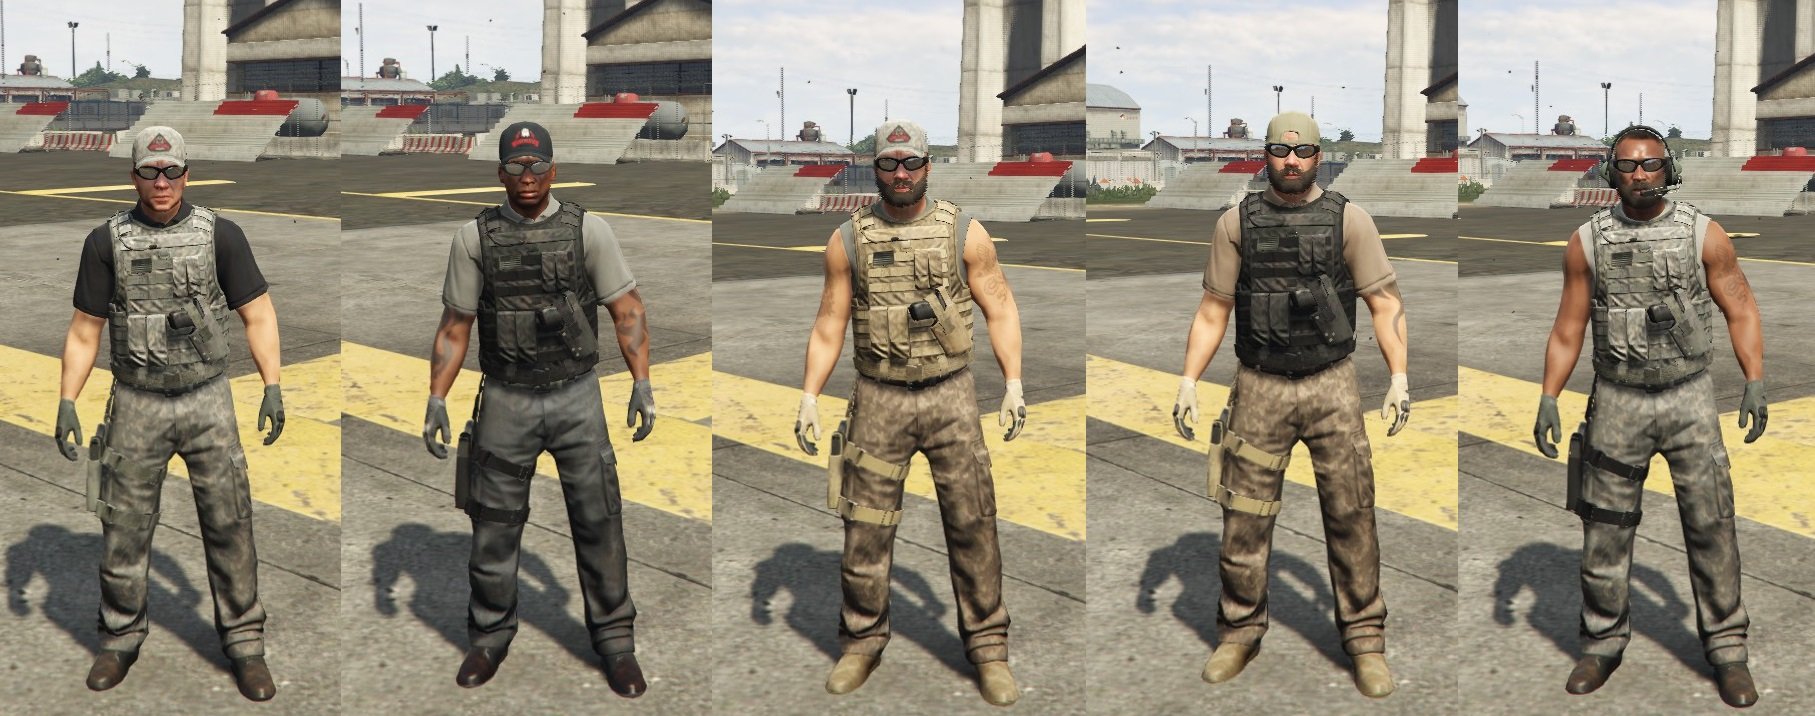 Gta 5 military outfit фото 74